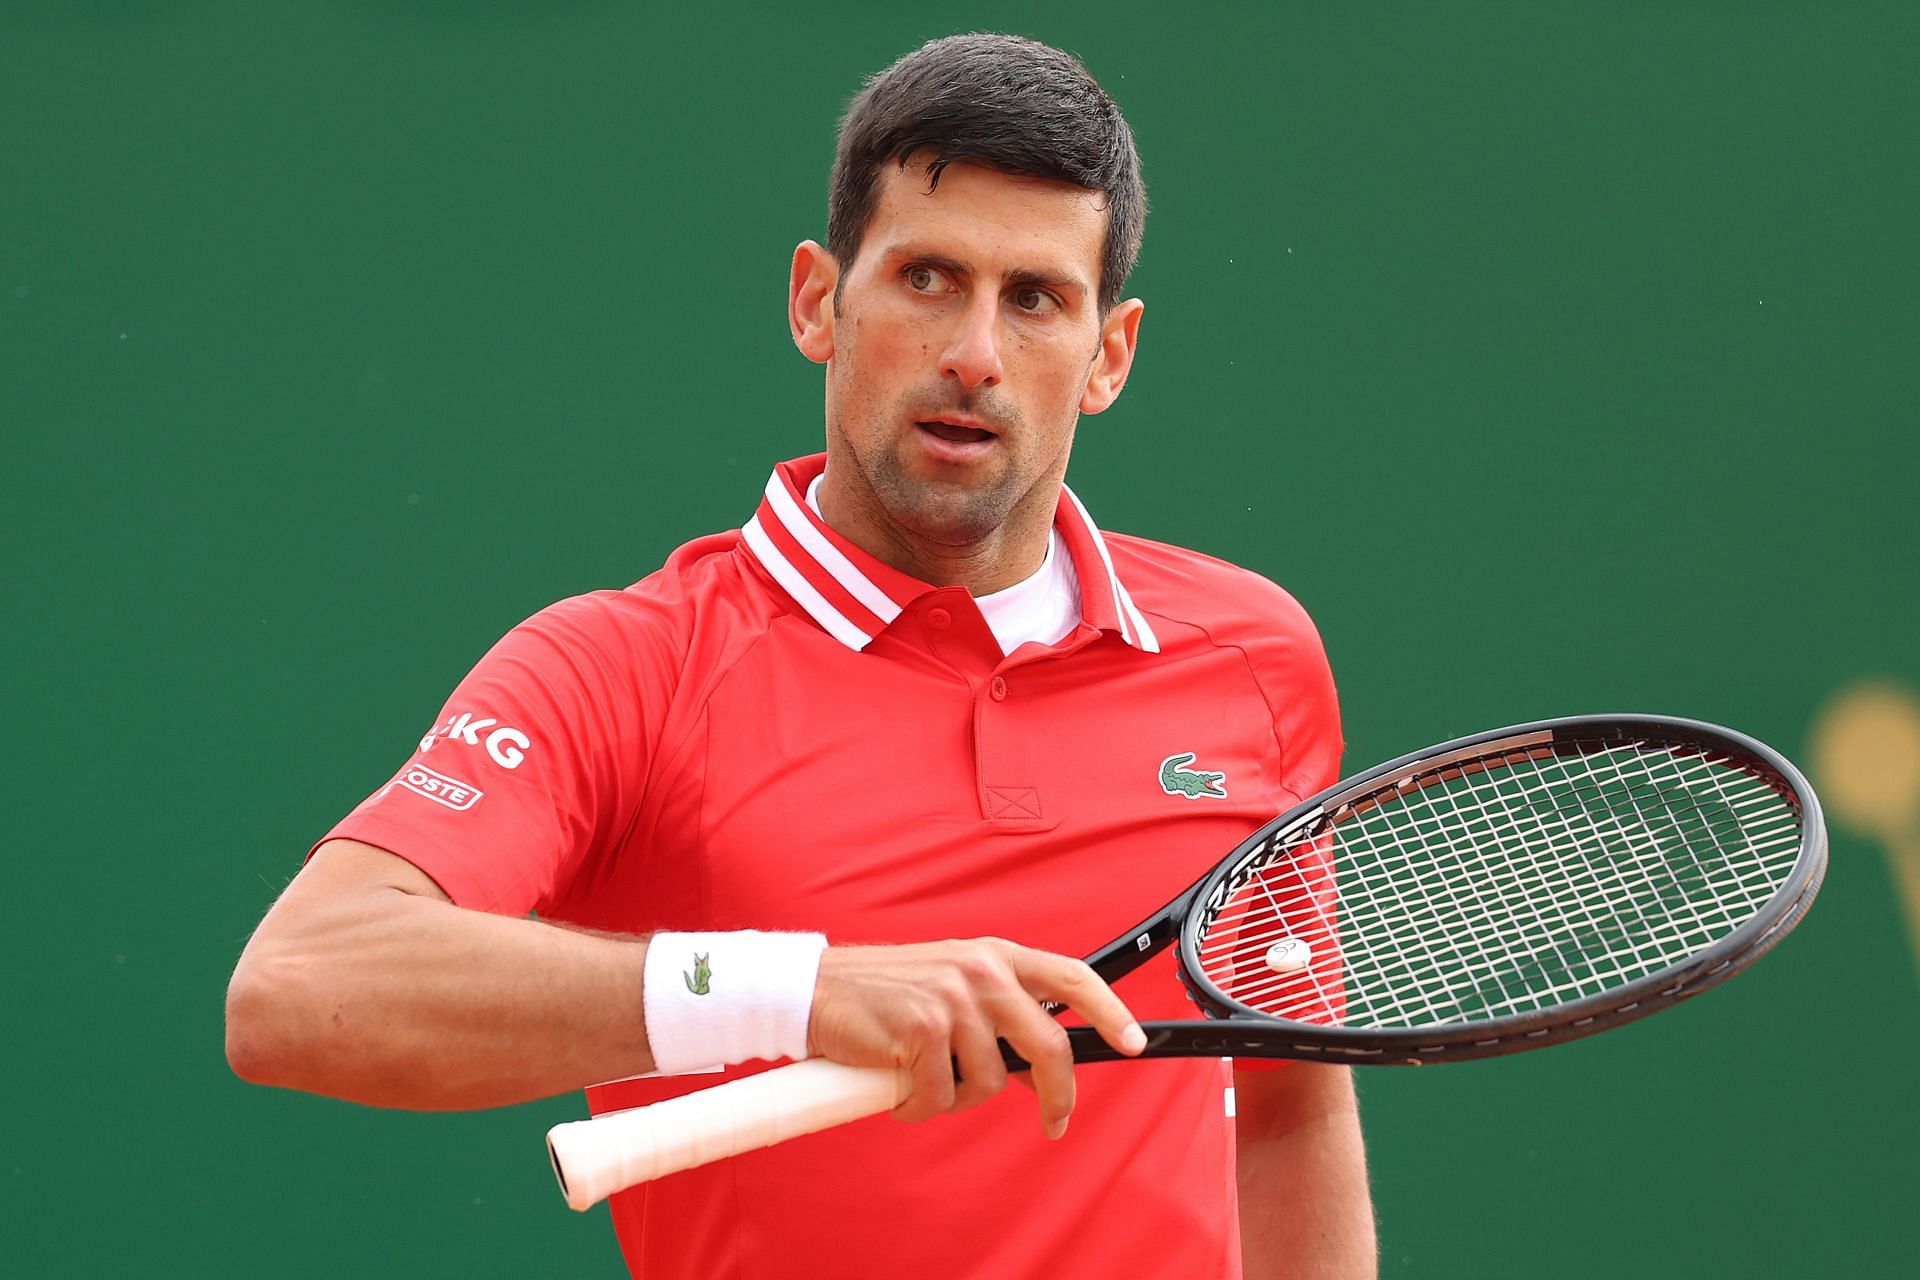 Novak Djokovic is currently ineligible to play at the US Open due to being unvaccinated